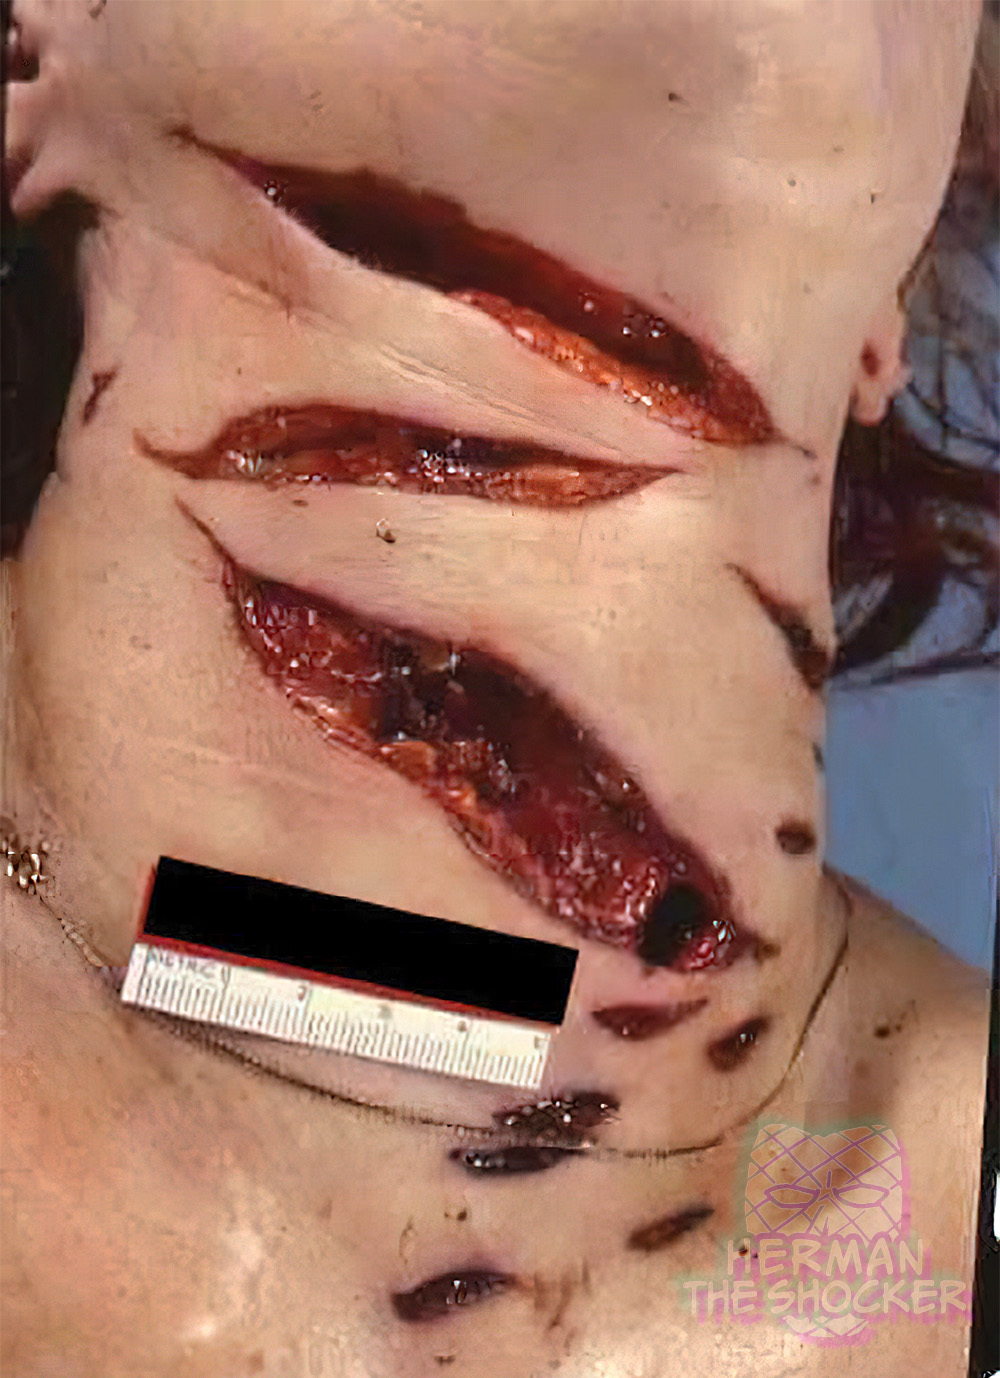 Homicidal incised wounds of the neck inflicted from the front